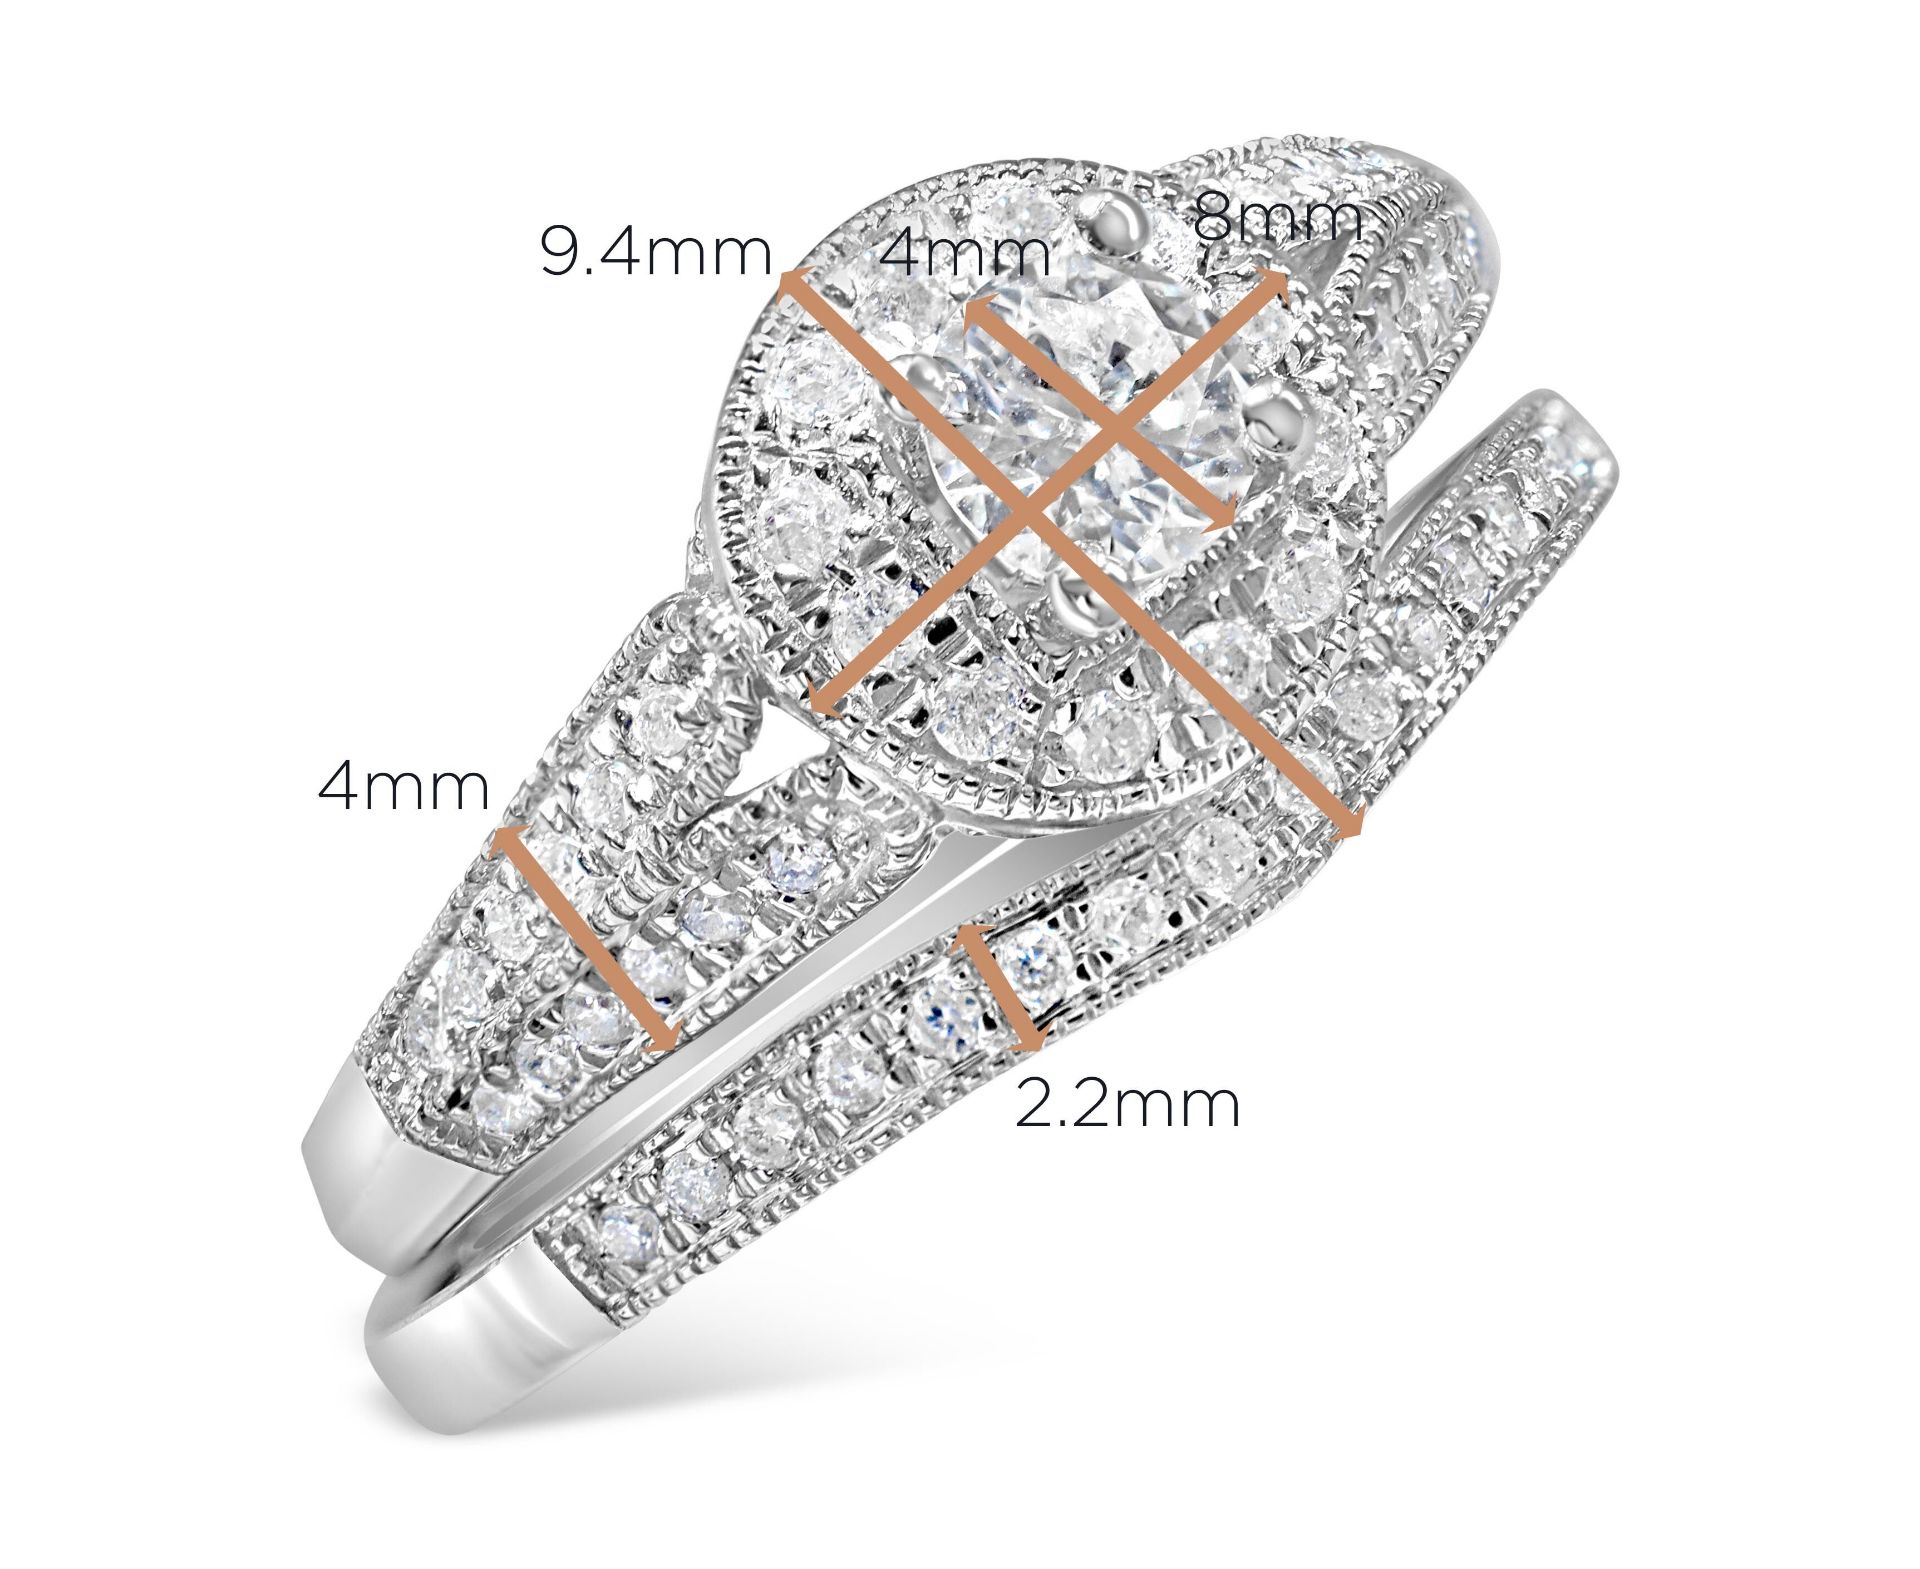 Bridal Set Of Diamond Engagement and Wedding Rings with over 50 diamonds in total, Metal 9ct White - Image 2 of 4